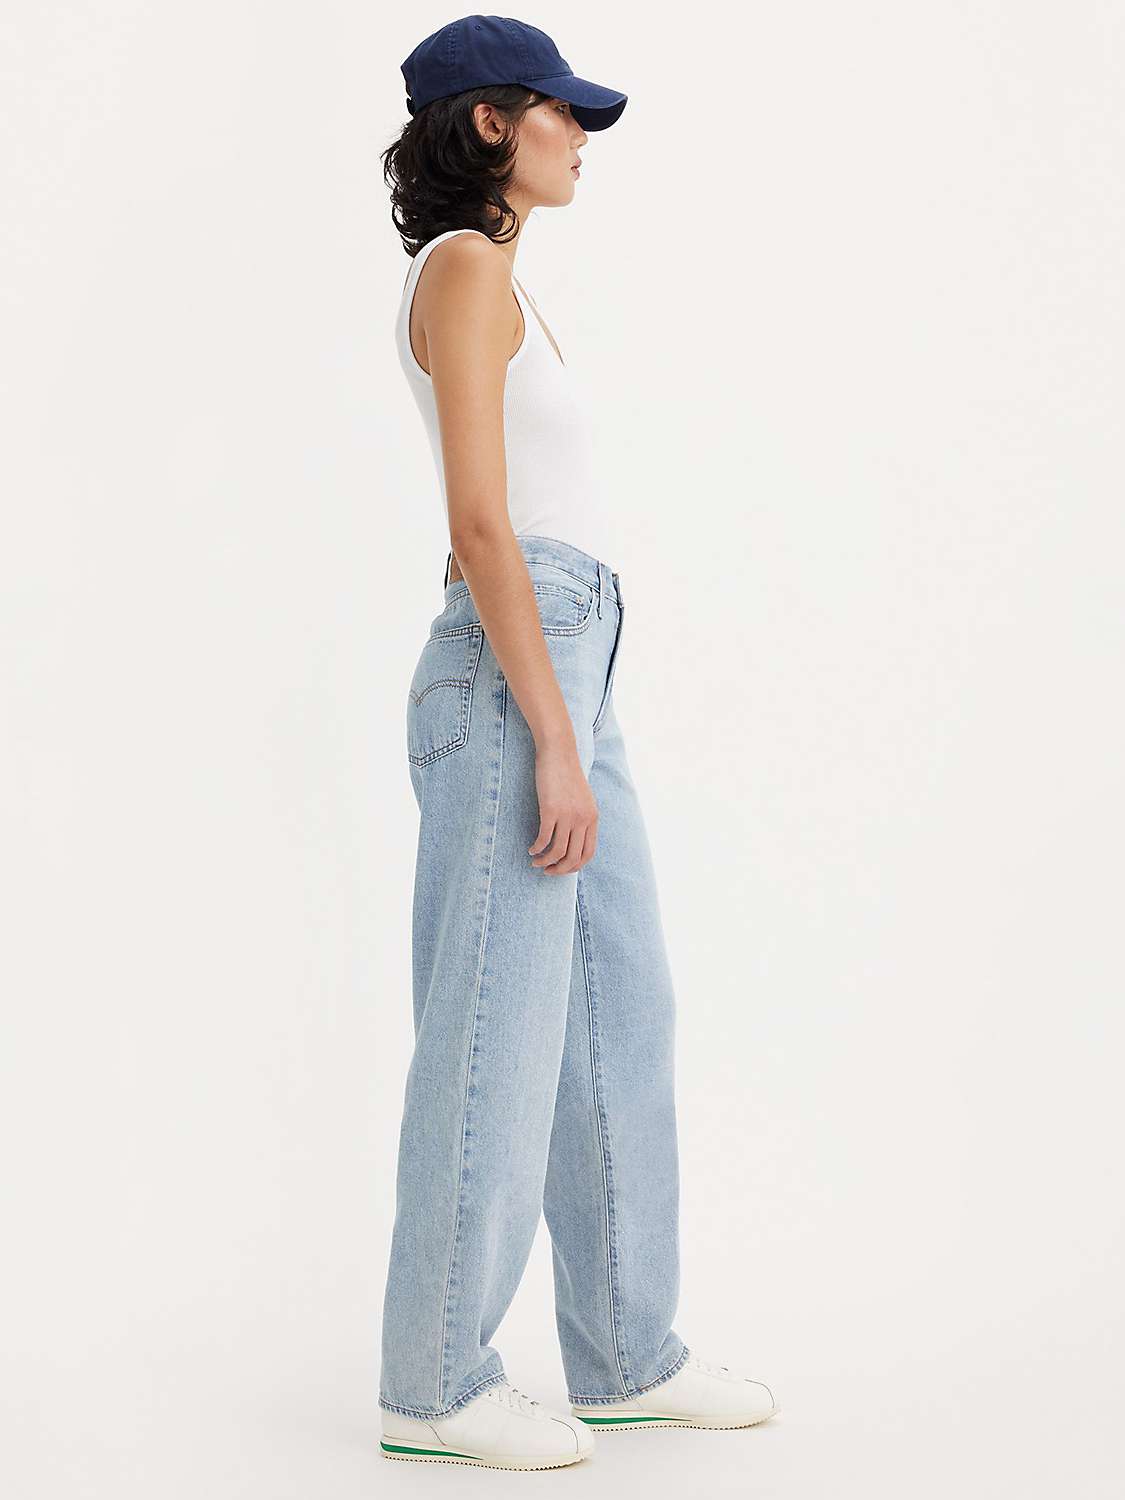 Buy Levi's Baggy Dad Straight Leg Jeans, Make A Difference Online at johnlewis.com